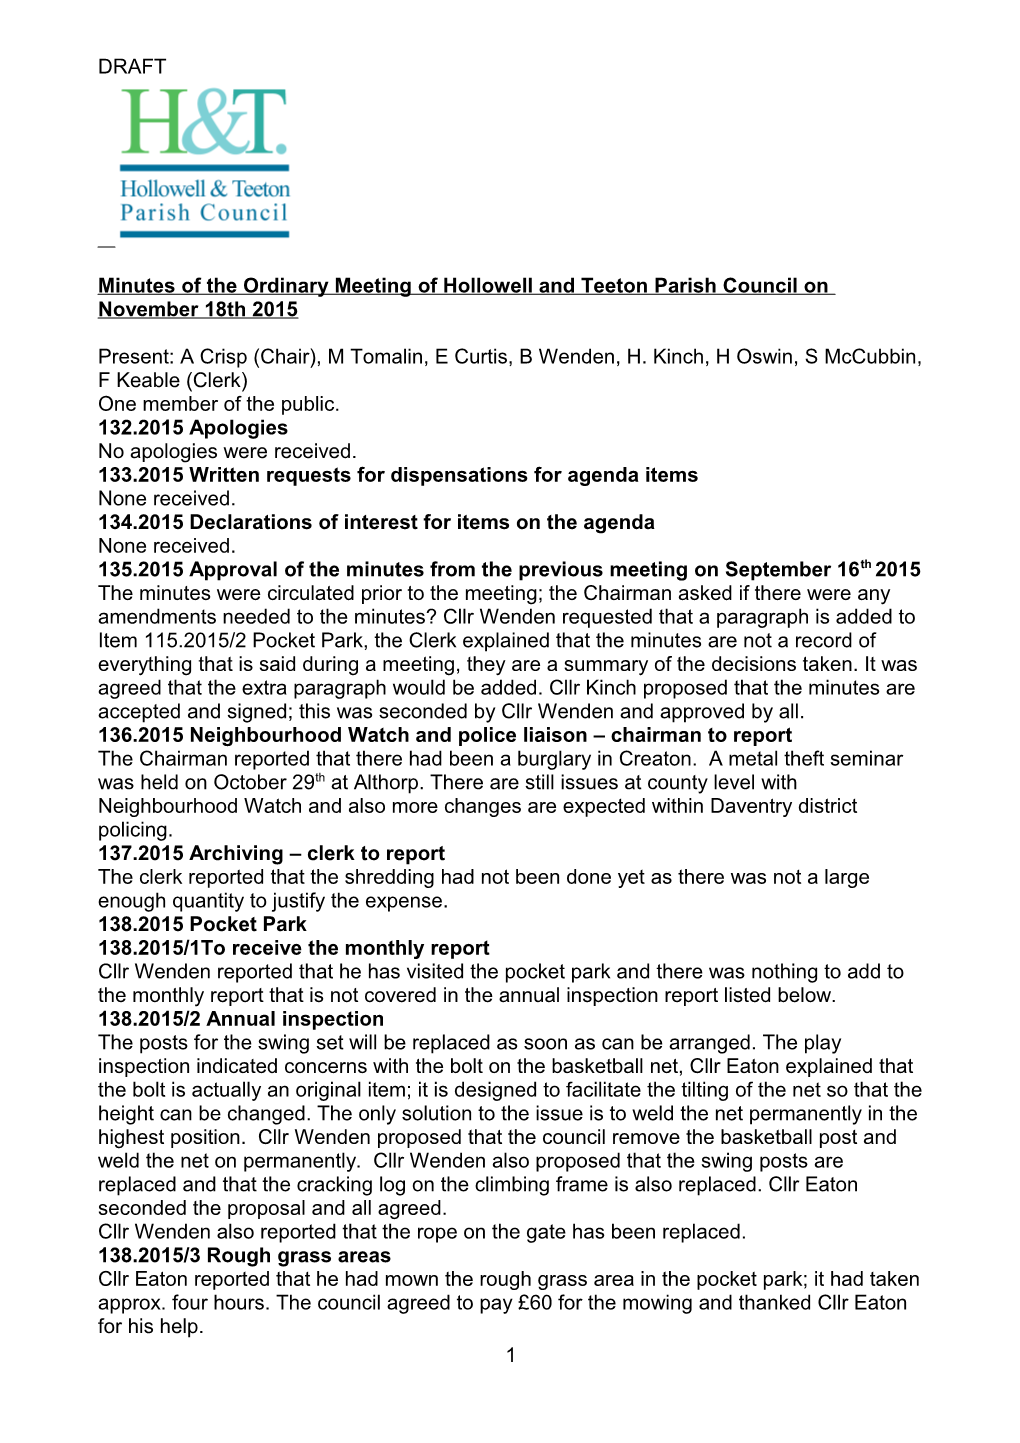 Minutes of the Annual Parish Council Meeting of Hollowell & Teeton Parish Council Held